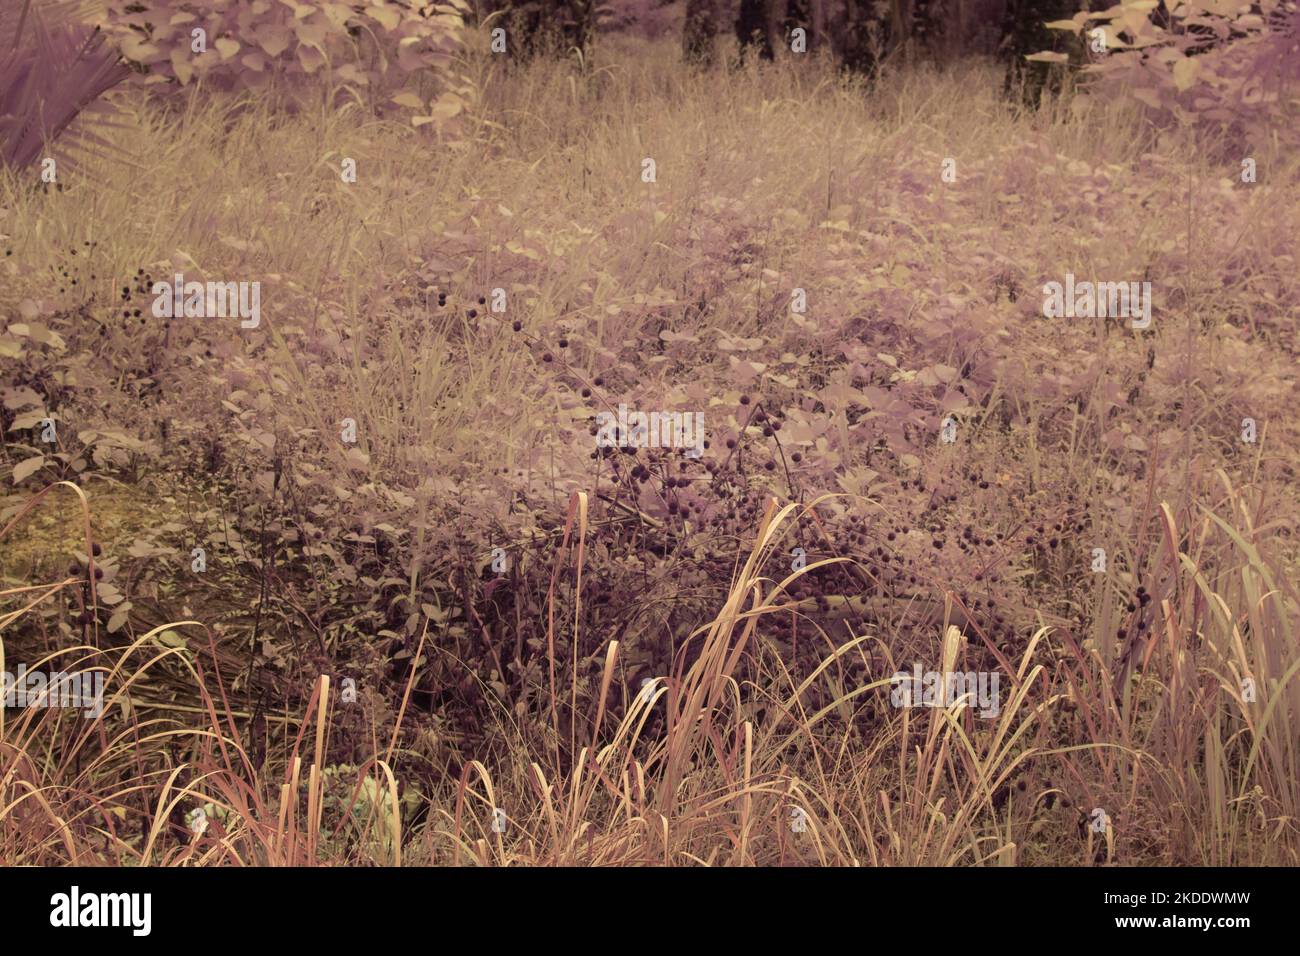 infrared image of the varieties of wild foliage at the farm. Stock Photo